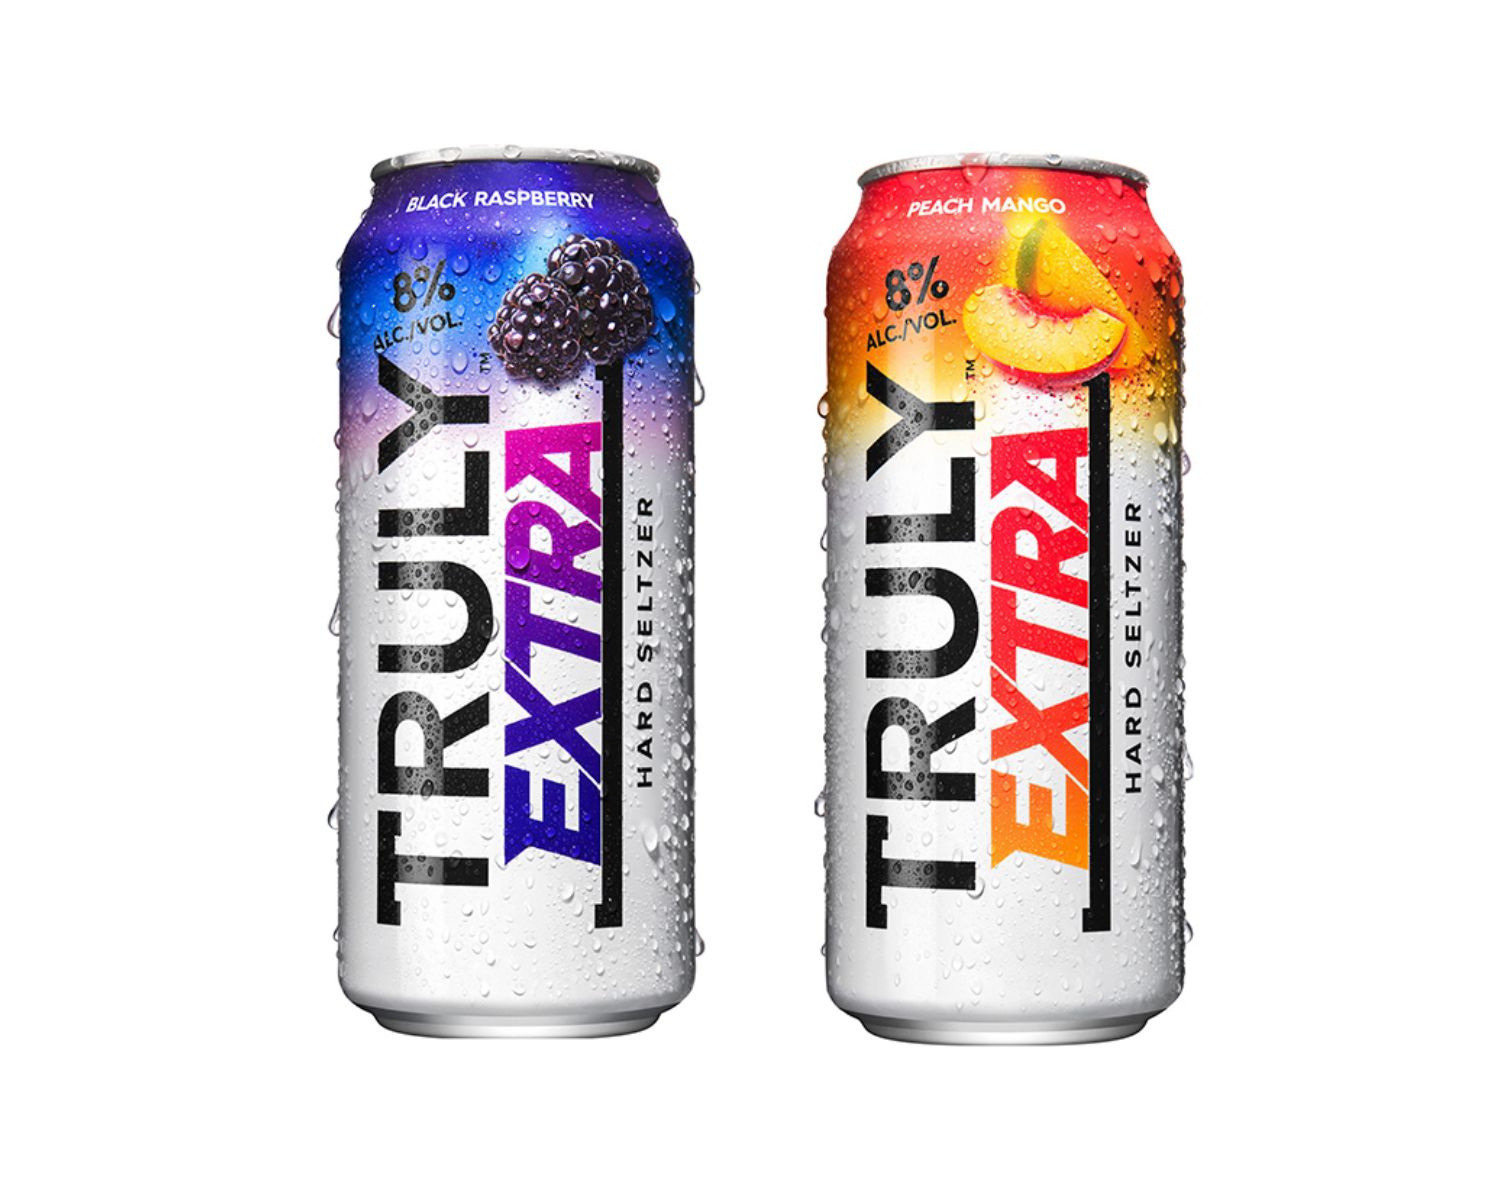 18-truly-hard-seltzer-nutrition-facts